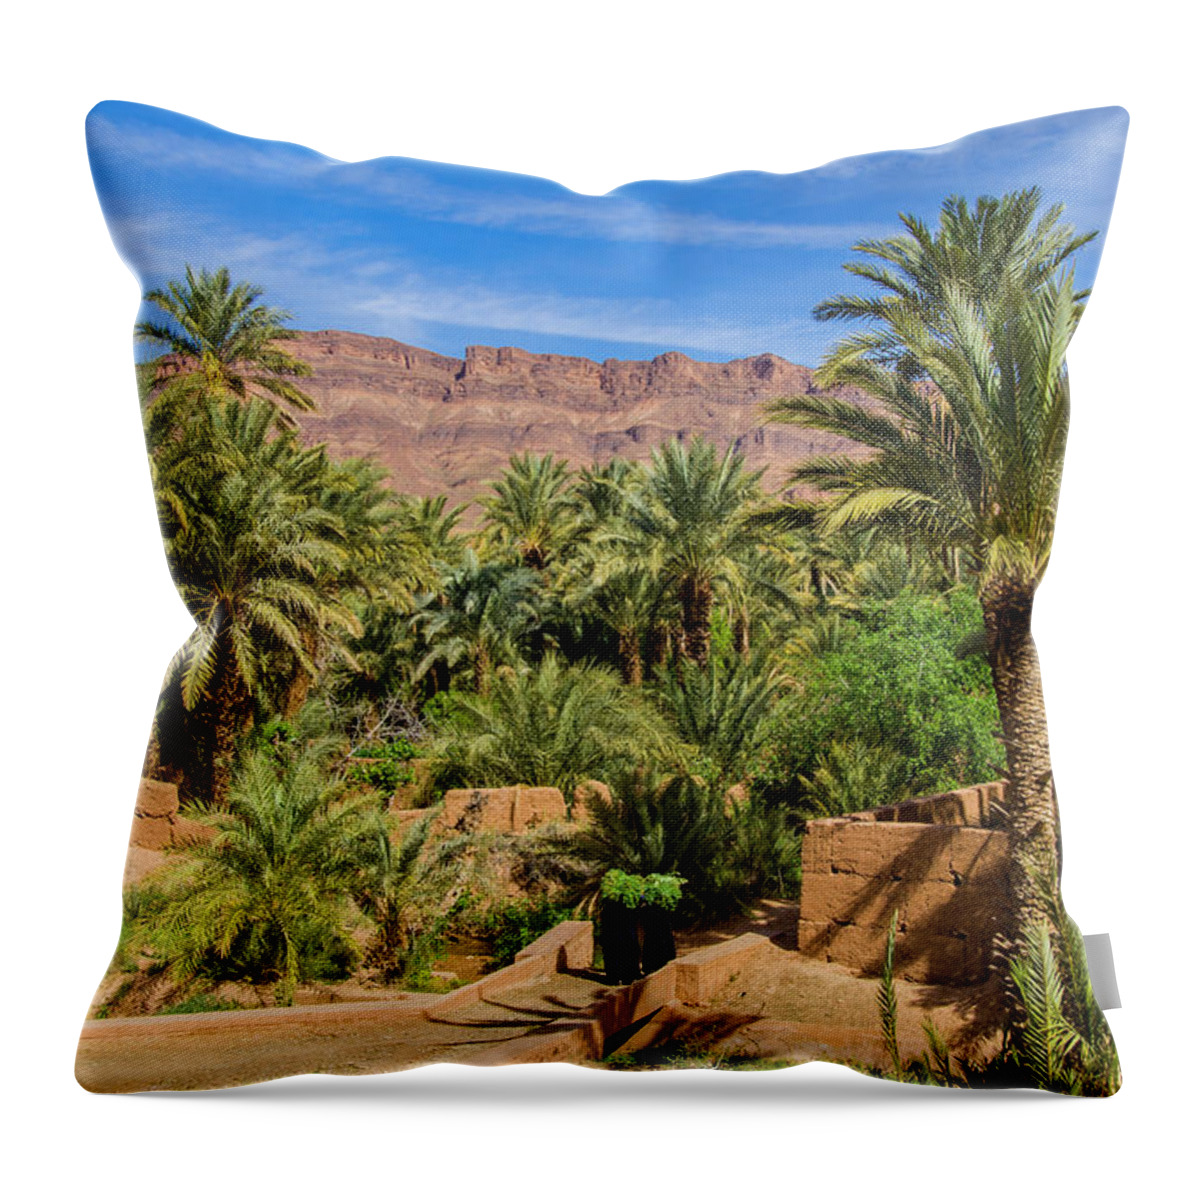 Tranquility Throw Pillow featuring the photograph Oasis Around Ouled Atmane Kasbah by Maremagnum